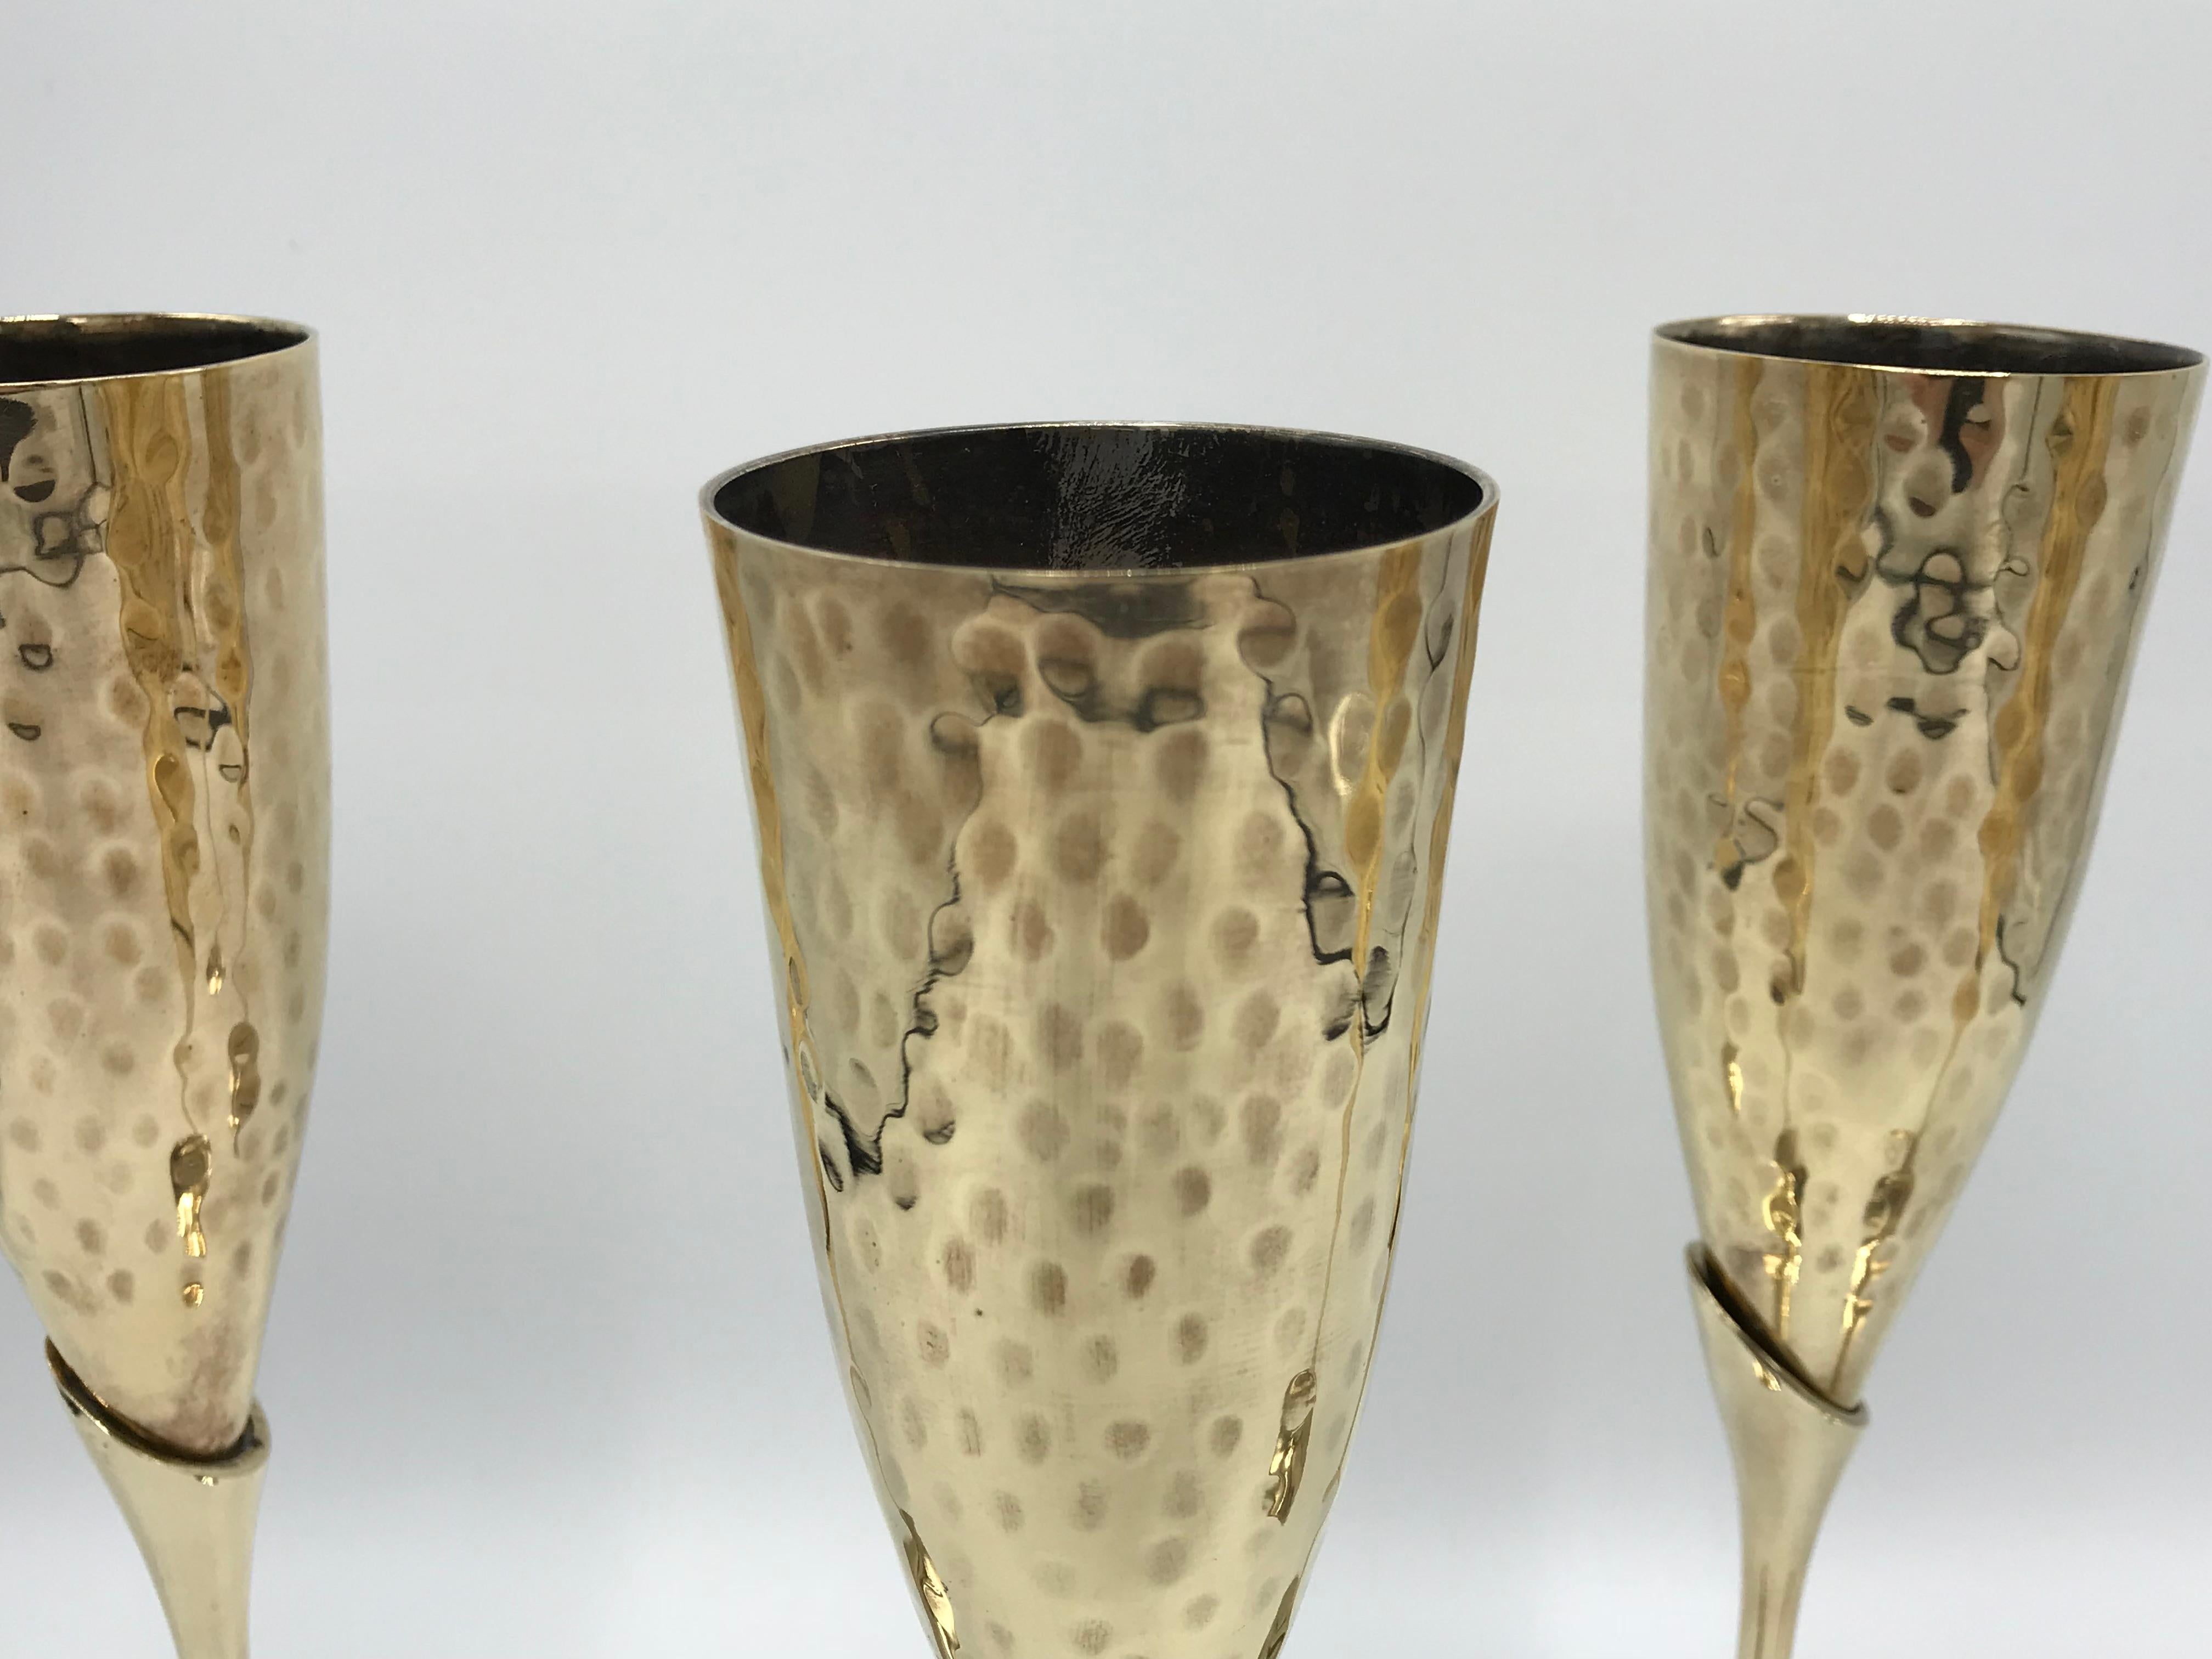 Listed is a fabulous, set of four, 1970s Italian brass champagne flutes with a hammered look. Heavy, weighing nearly 3lbs for the set of four.